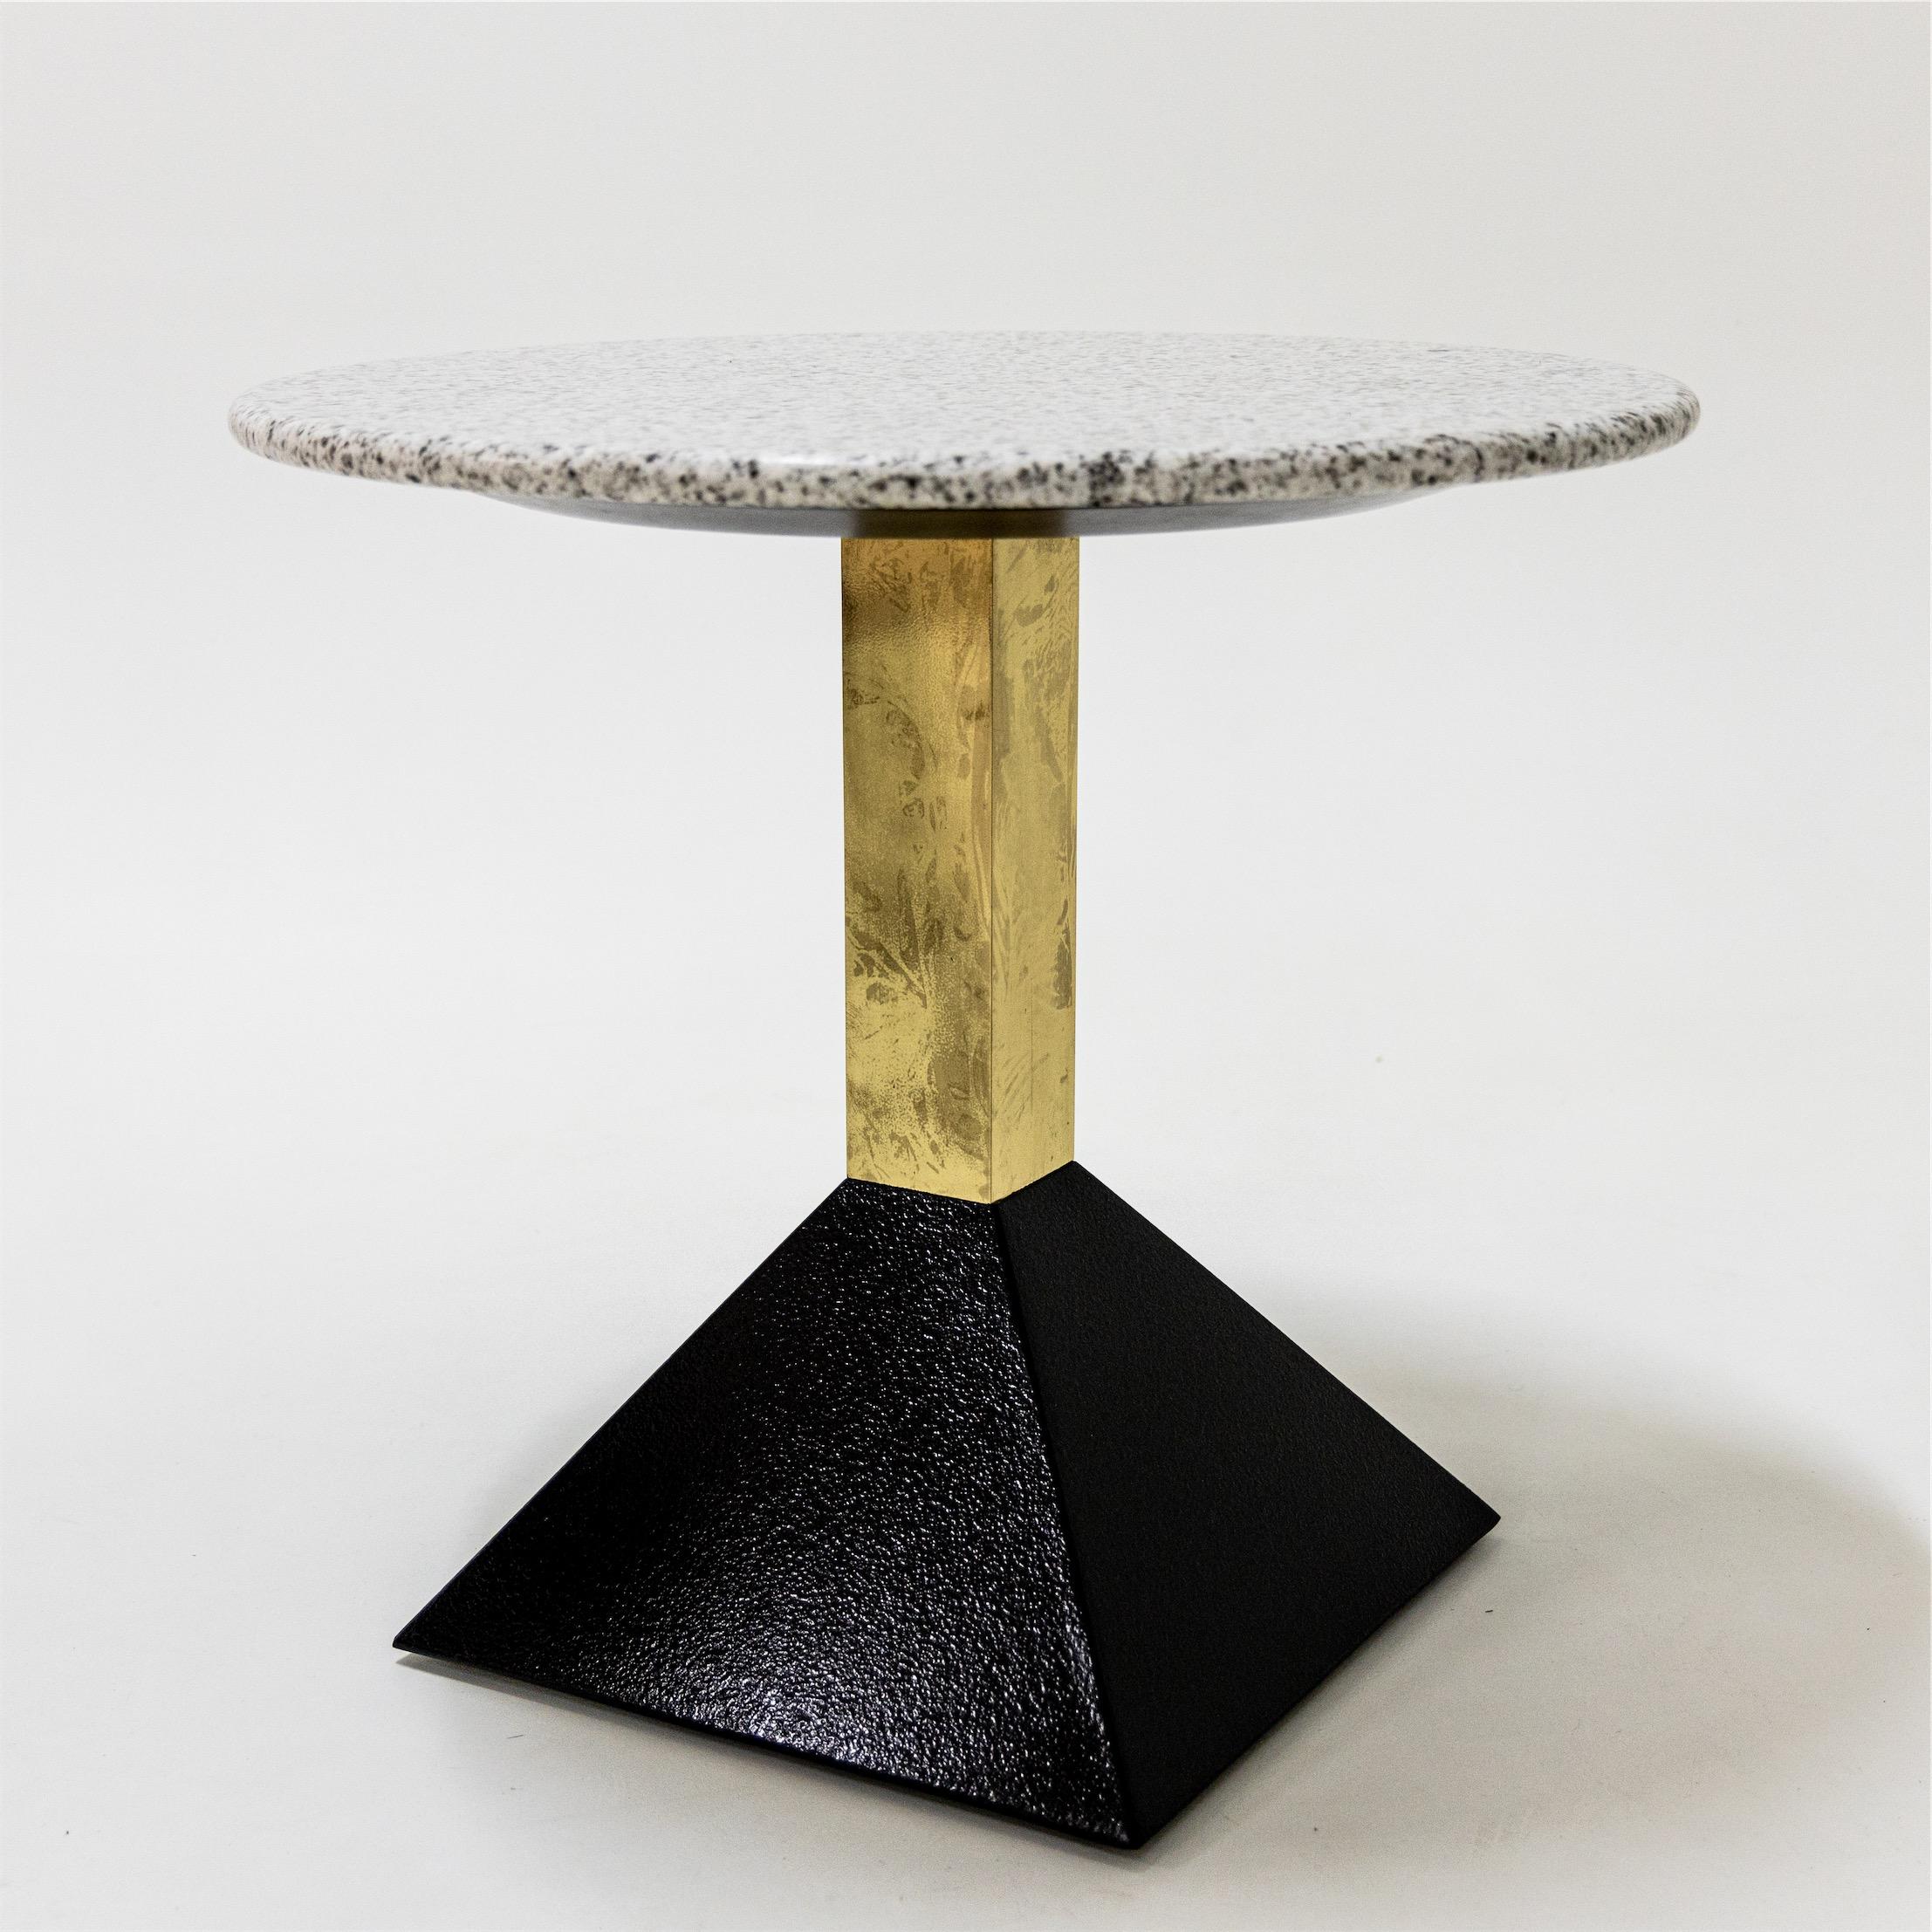 Pair of tables with round granite tops in white and pink respectively over a brass square shaft and black pyramidal base.